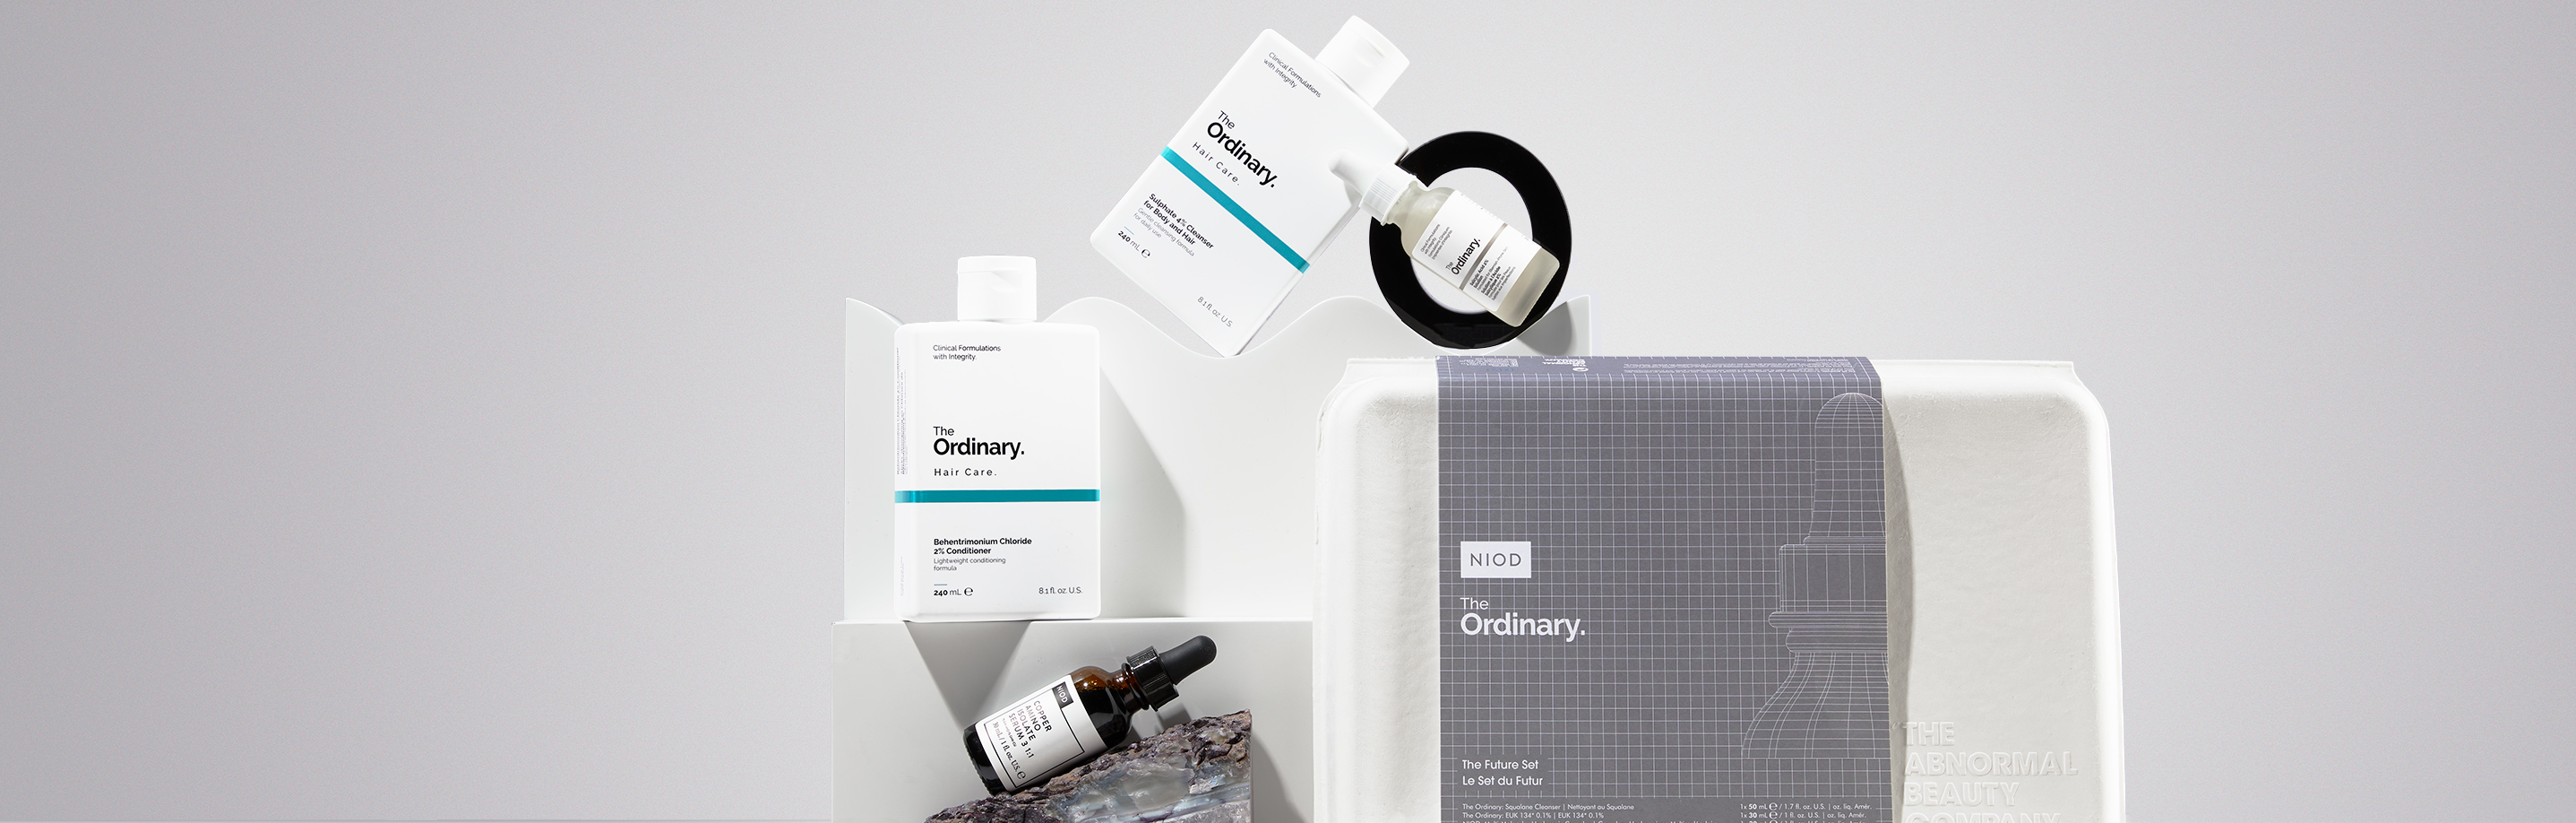 NIOD and The Ordinary have new homes